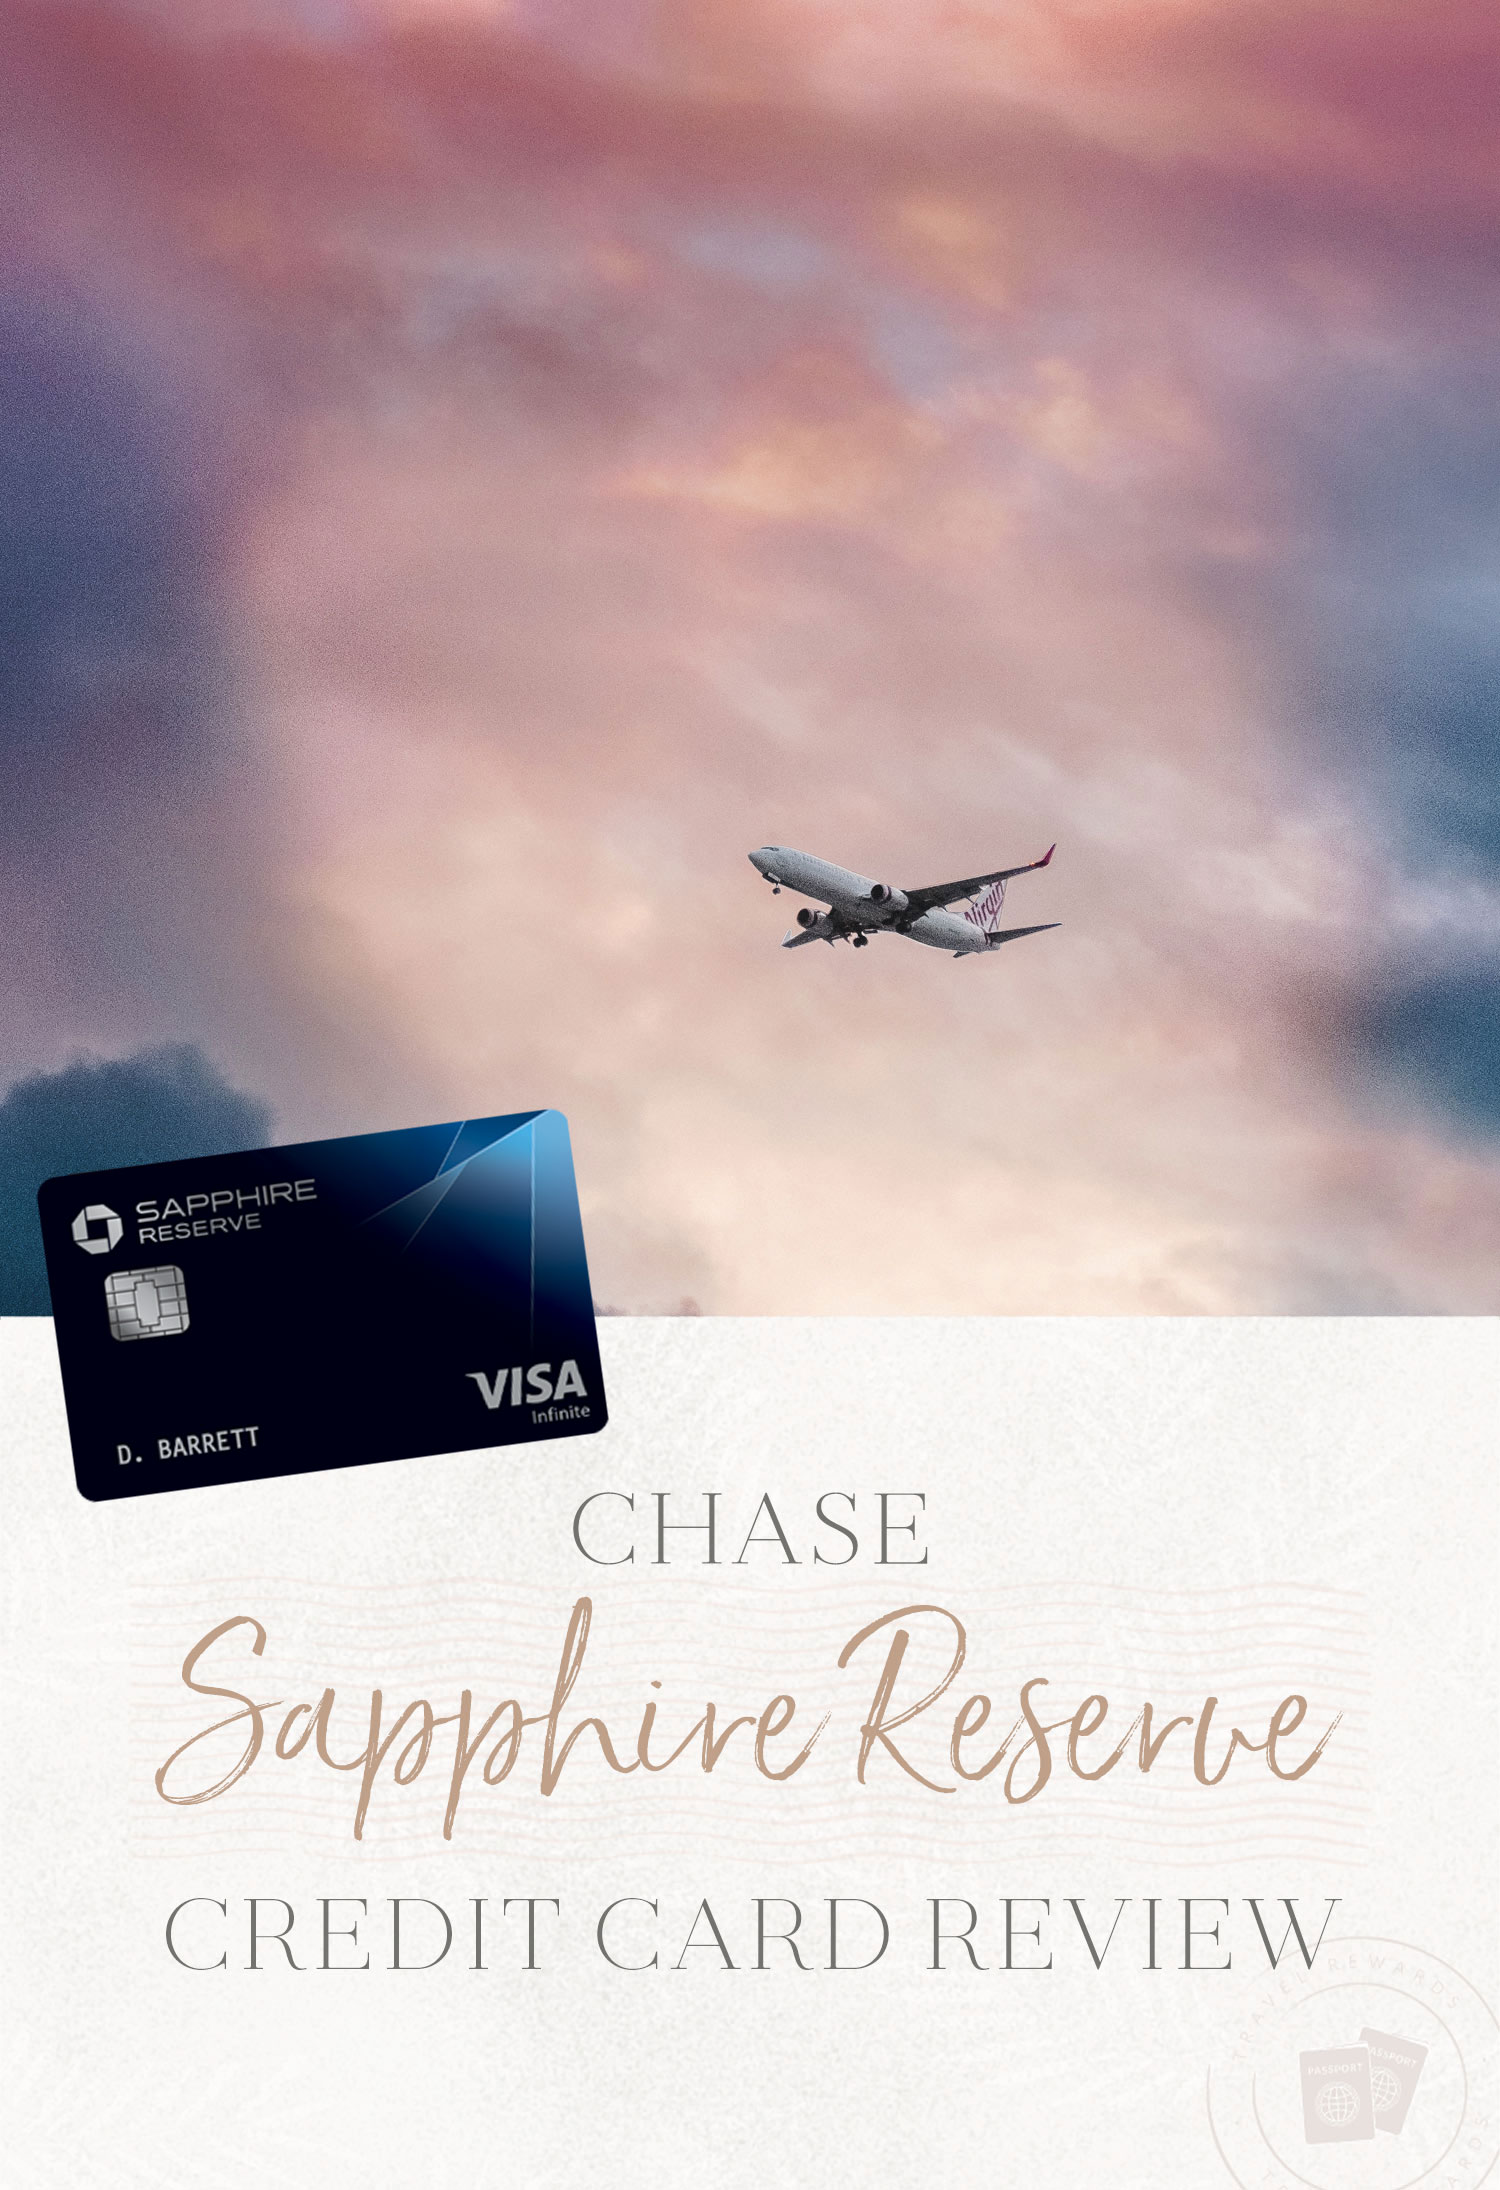 Chase Sapphire Reserve Travel Credit Card Review